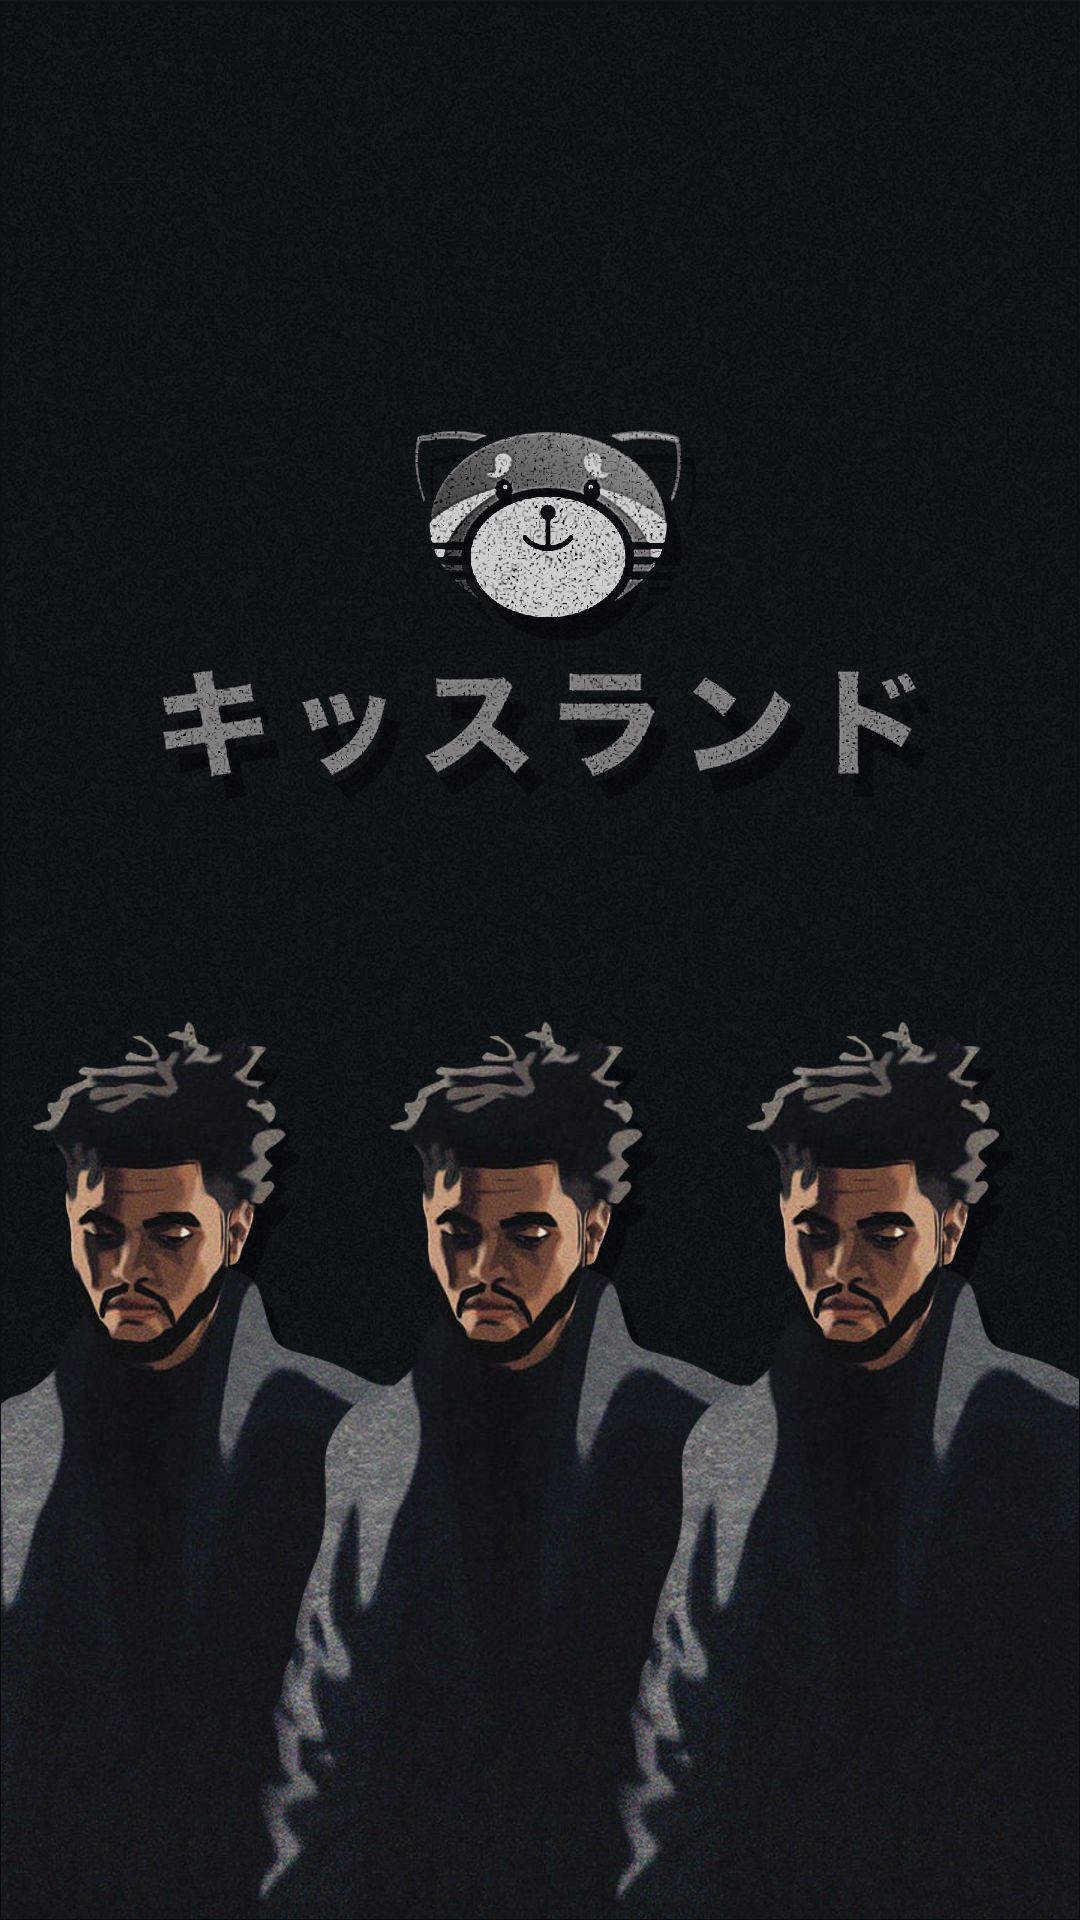 ❤❤Abel Tesfaye❤❤. The weeknd trilogy, The weeknd wallpaper iphone, The weeknd poster